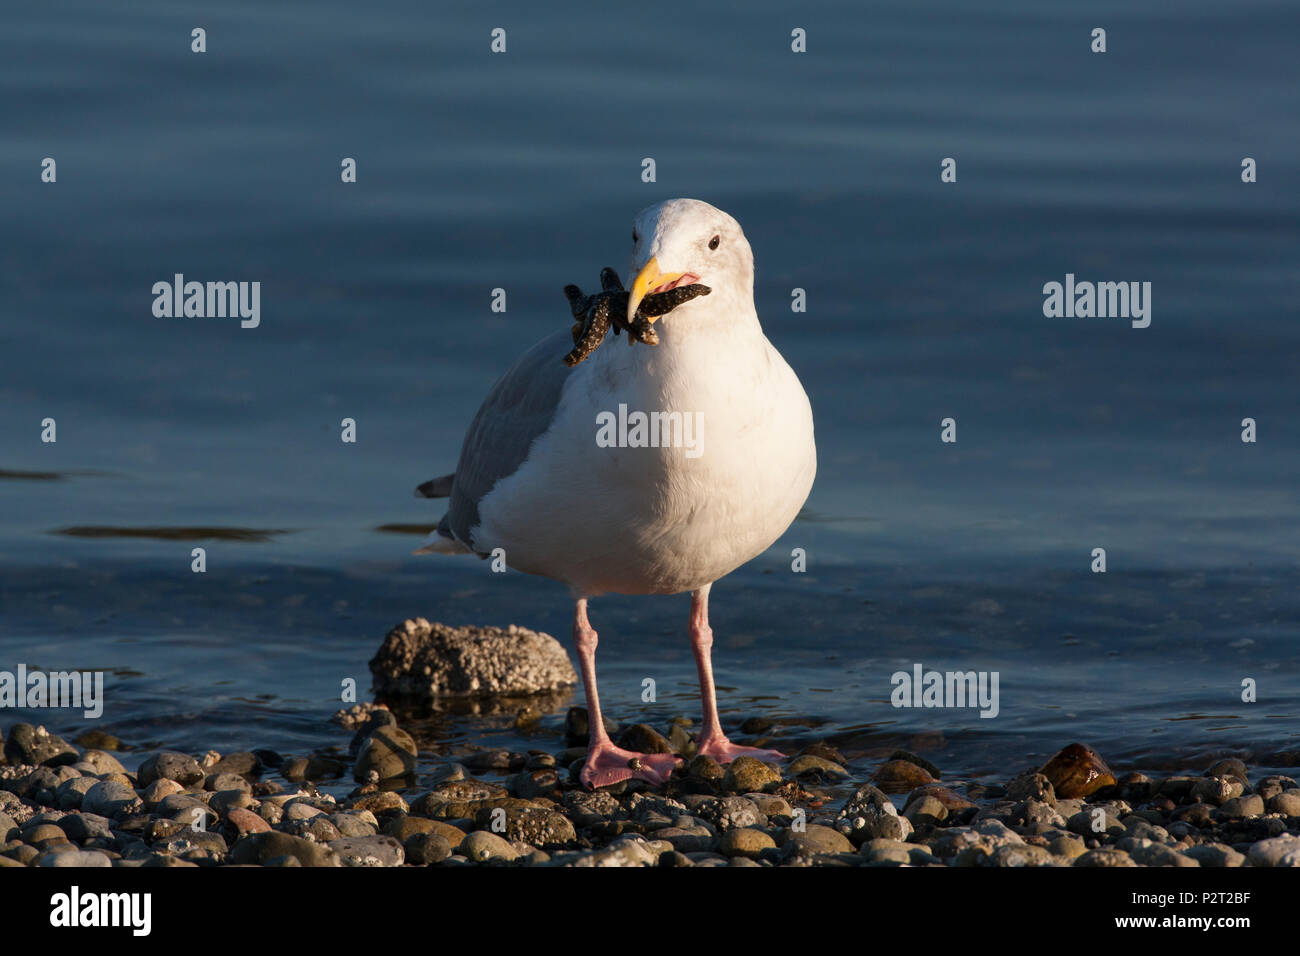 Glaucous-winged gull (Larus glaucescens) picks up a starfish with its beak. Stock Photo